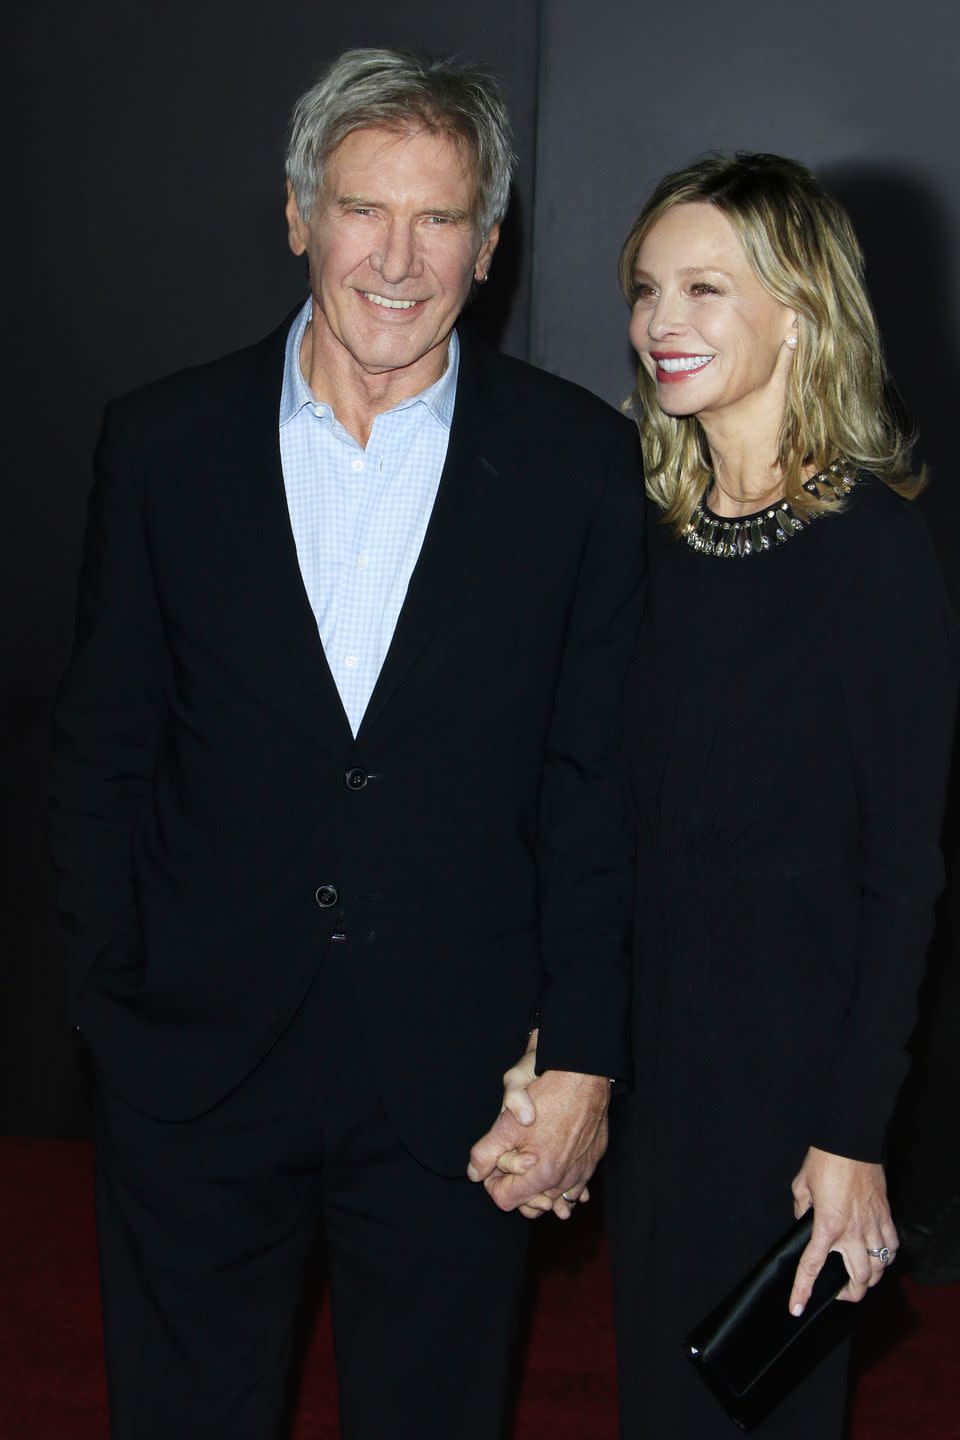 harrison ford and calista flockhart 'star wars the force awakens' premiere in los angeles